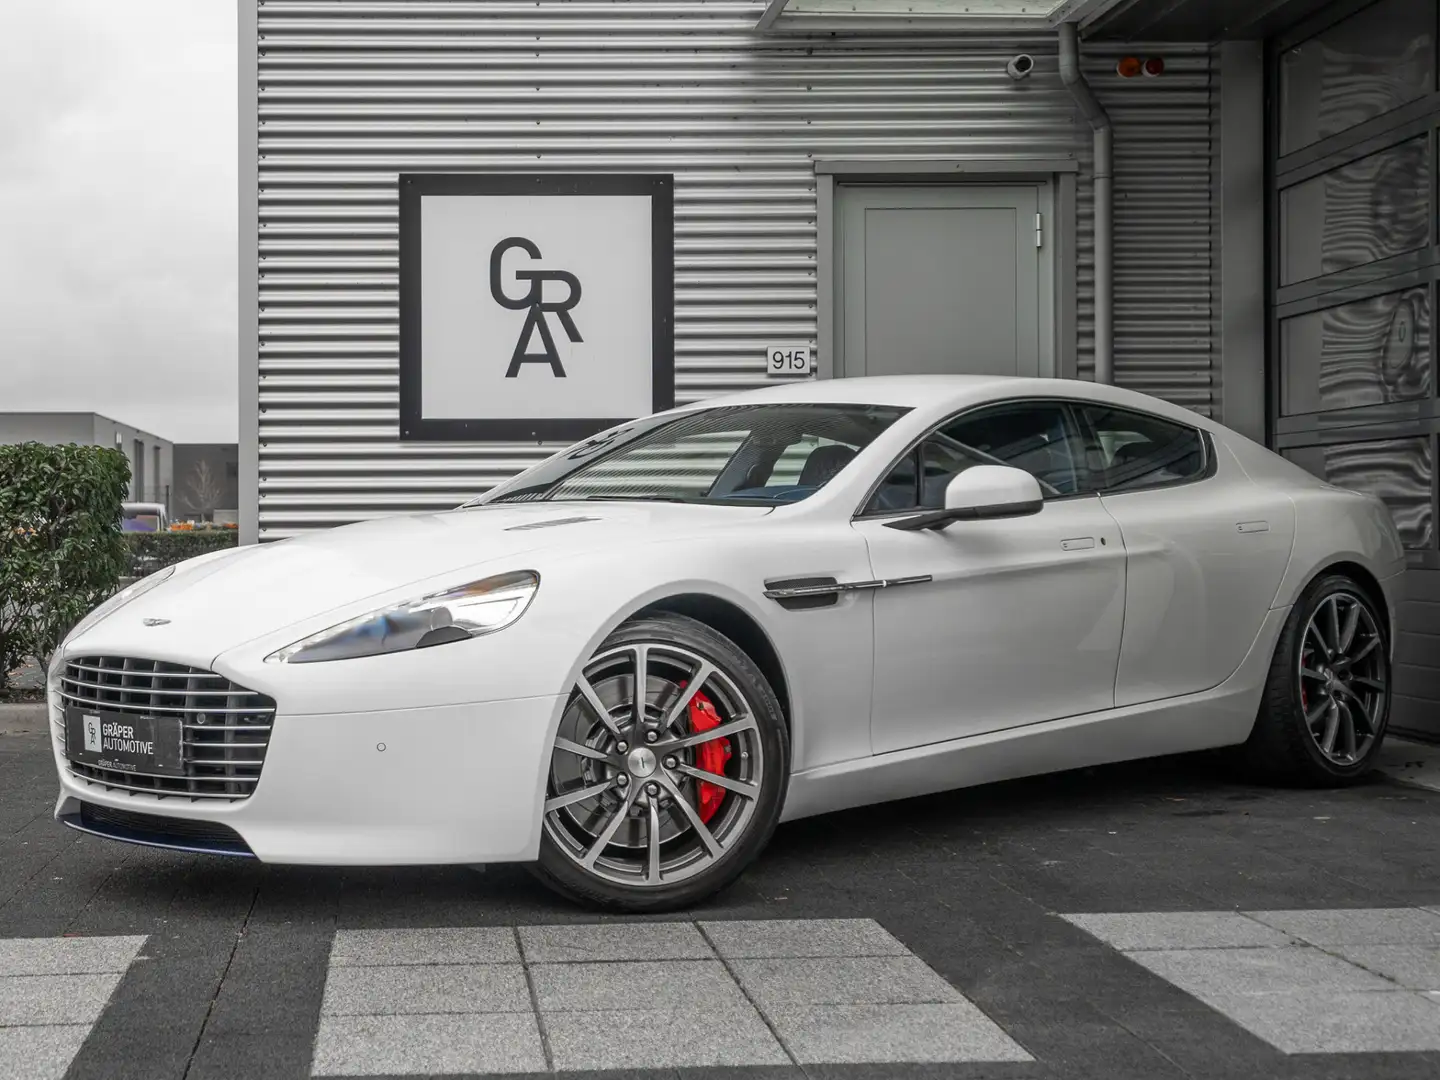 Aston Martin Rapide S 6.0 V12 ‘Britain is Great’ Edition by Q 1/8 Білий - 2